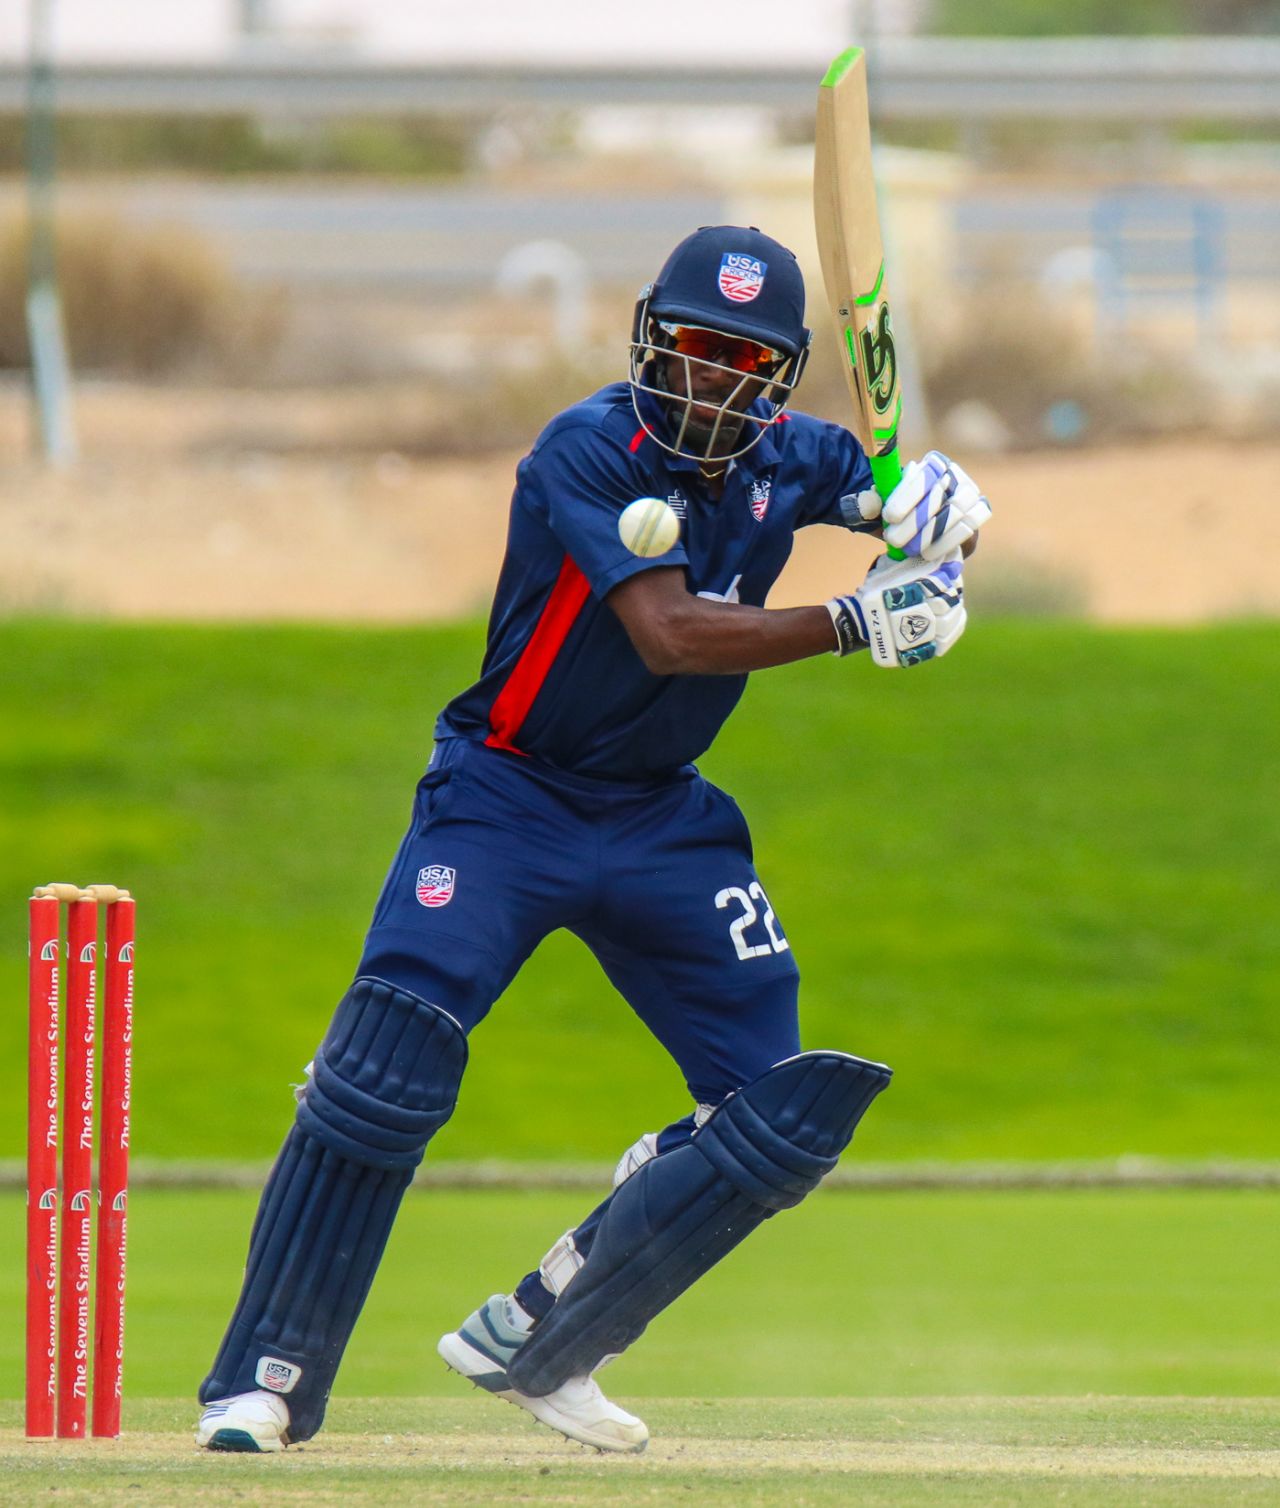 Hayden Walsh completes a wristy flick through midwicket, UAE v USA, Dubai, March 25, 2019